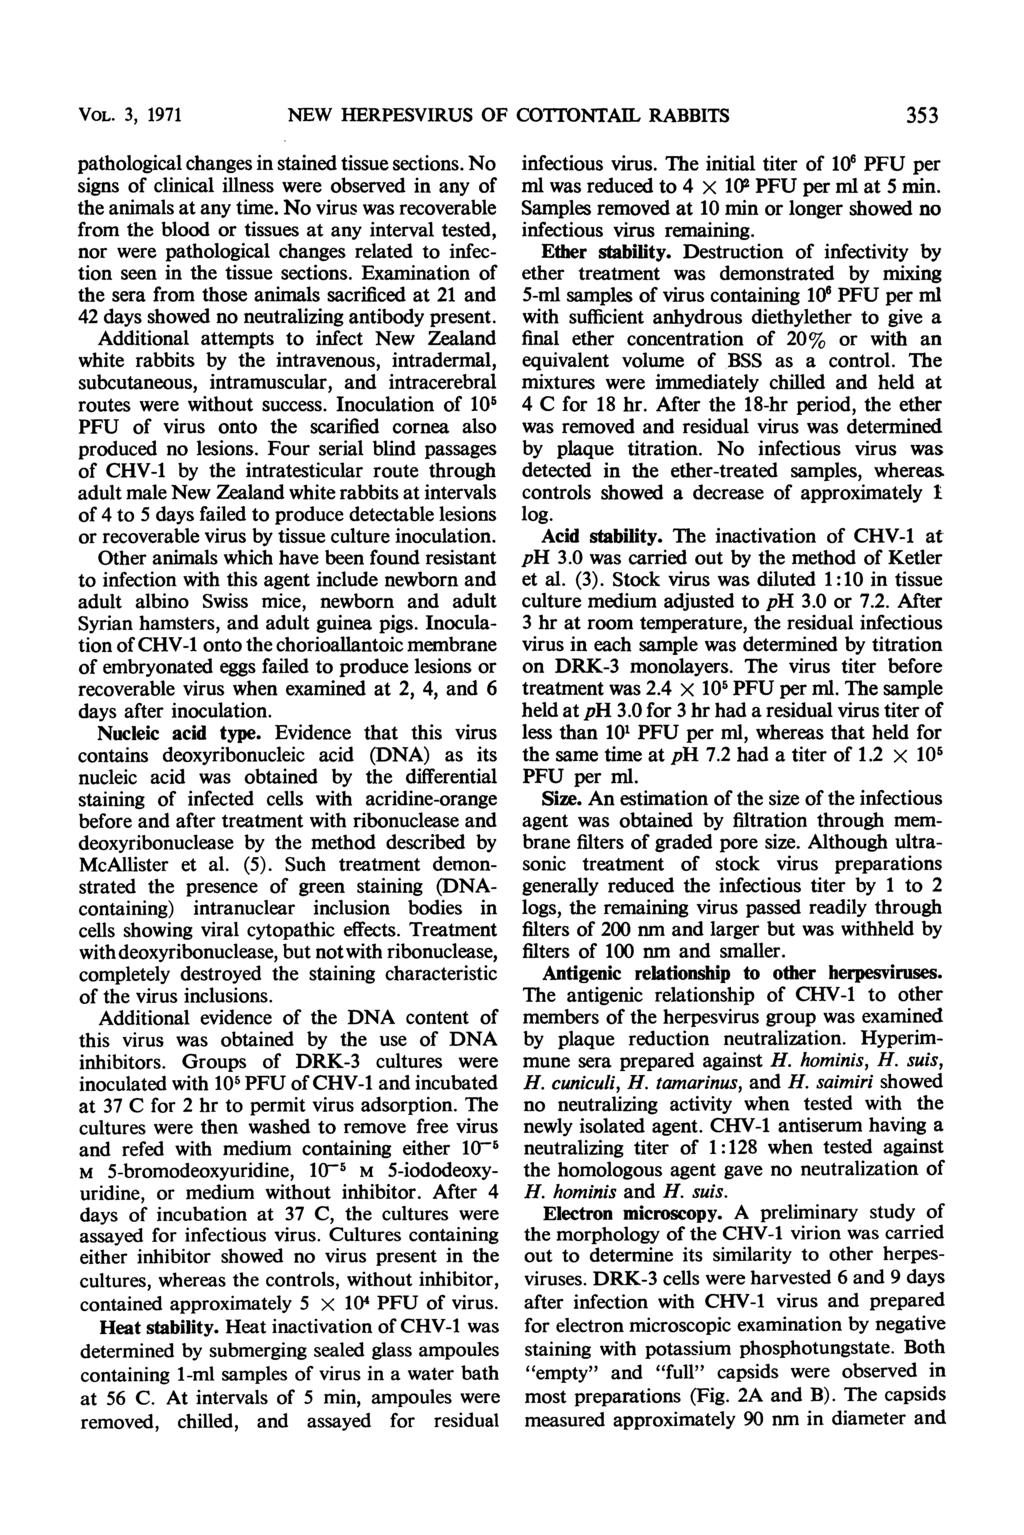 VOL. 3, 1971 NEW HERPESVIRUS OF CO1TONTAIL RABBITS 353 pathological changes in stained tissue sections. No signs of clinical illness were observed in any of the animals at any time.